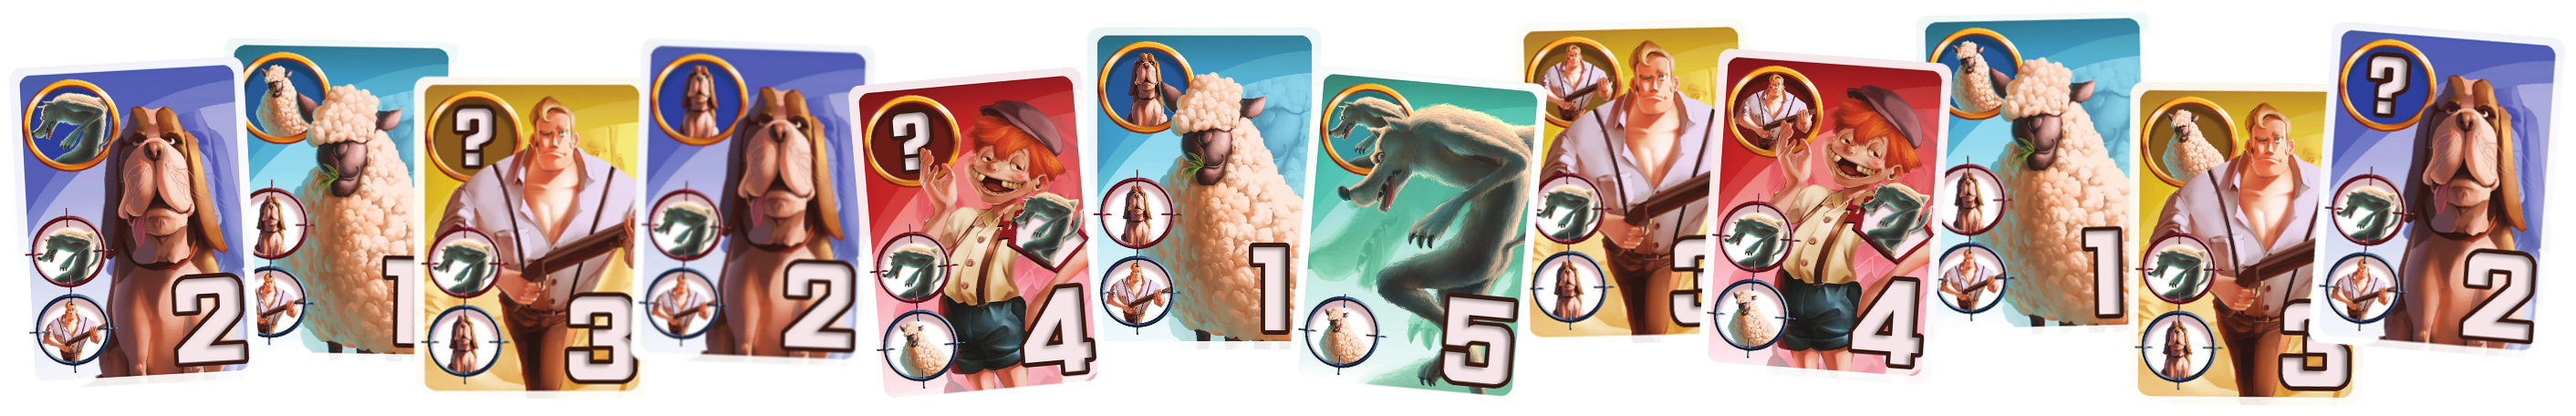 Wooolf!! - Character cards